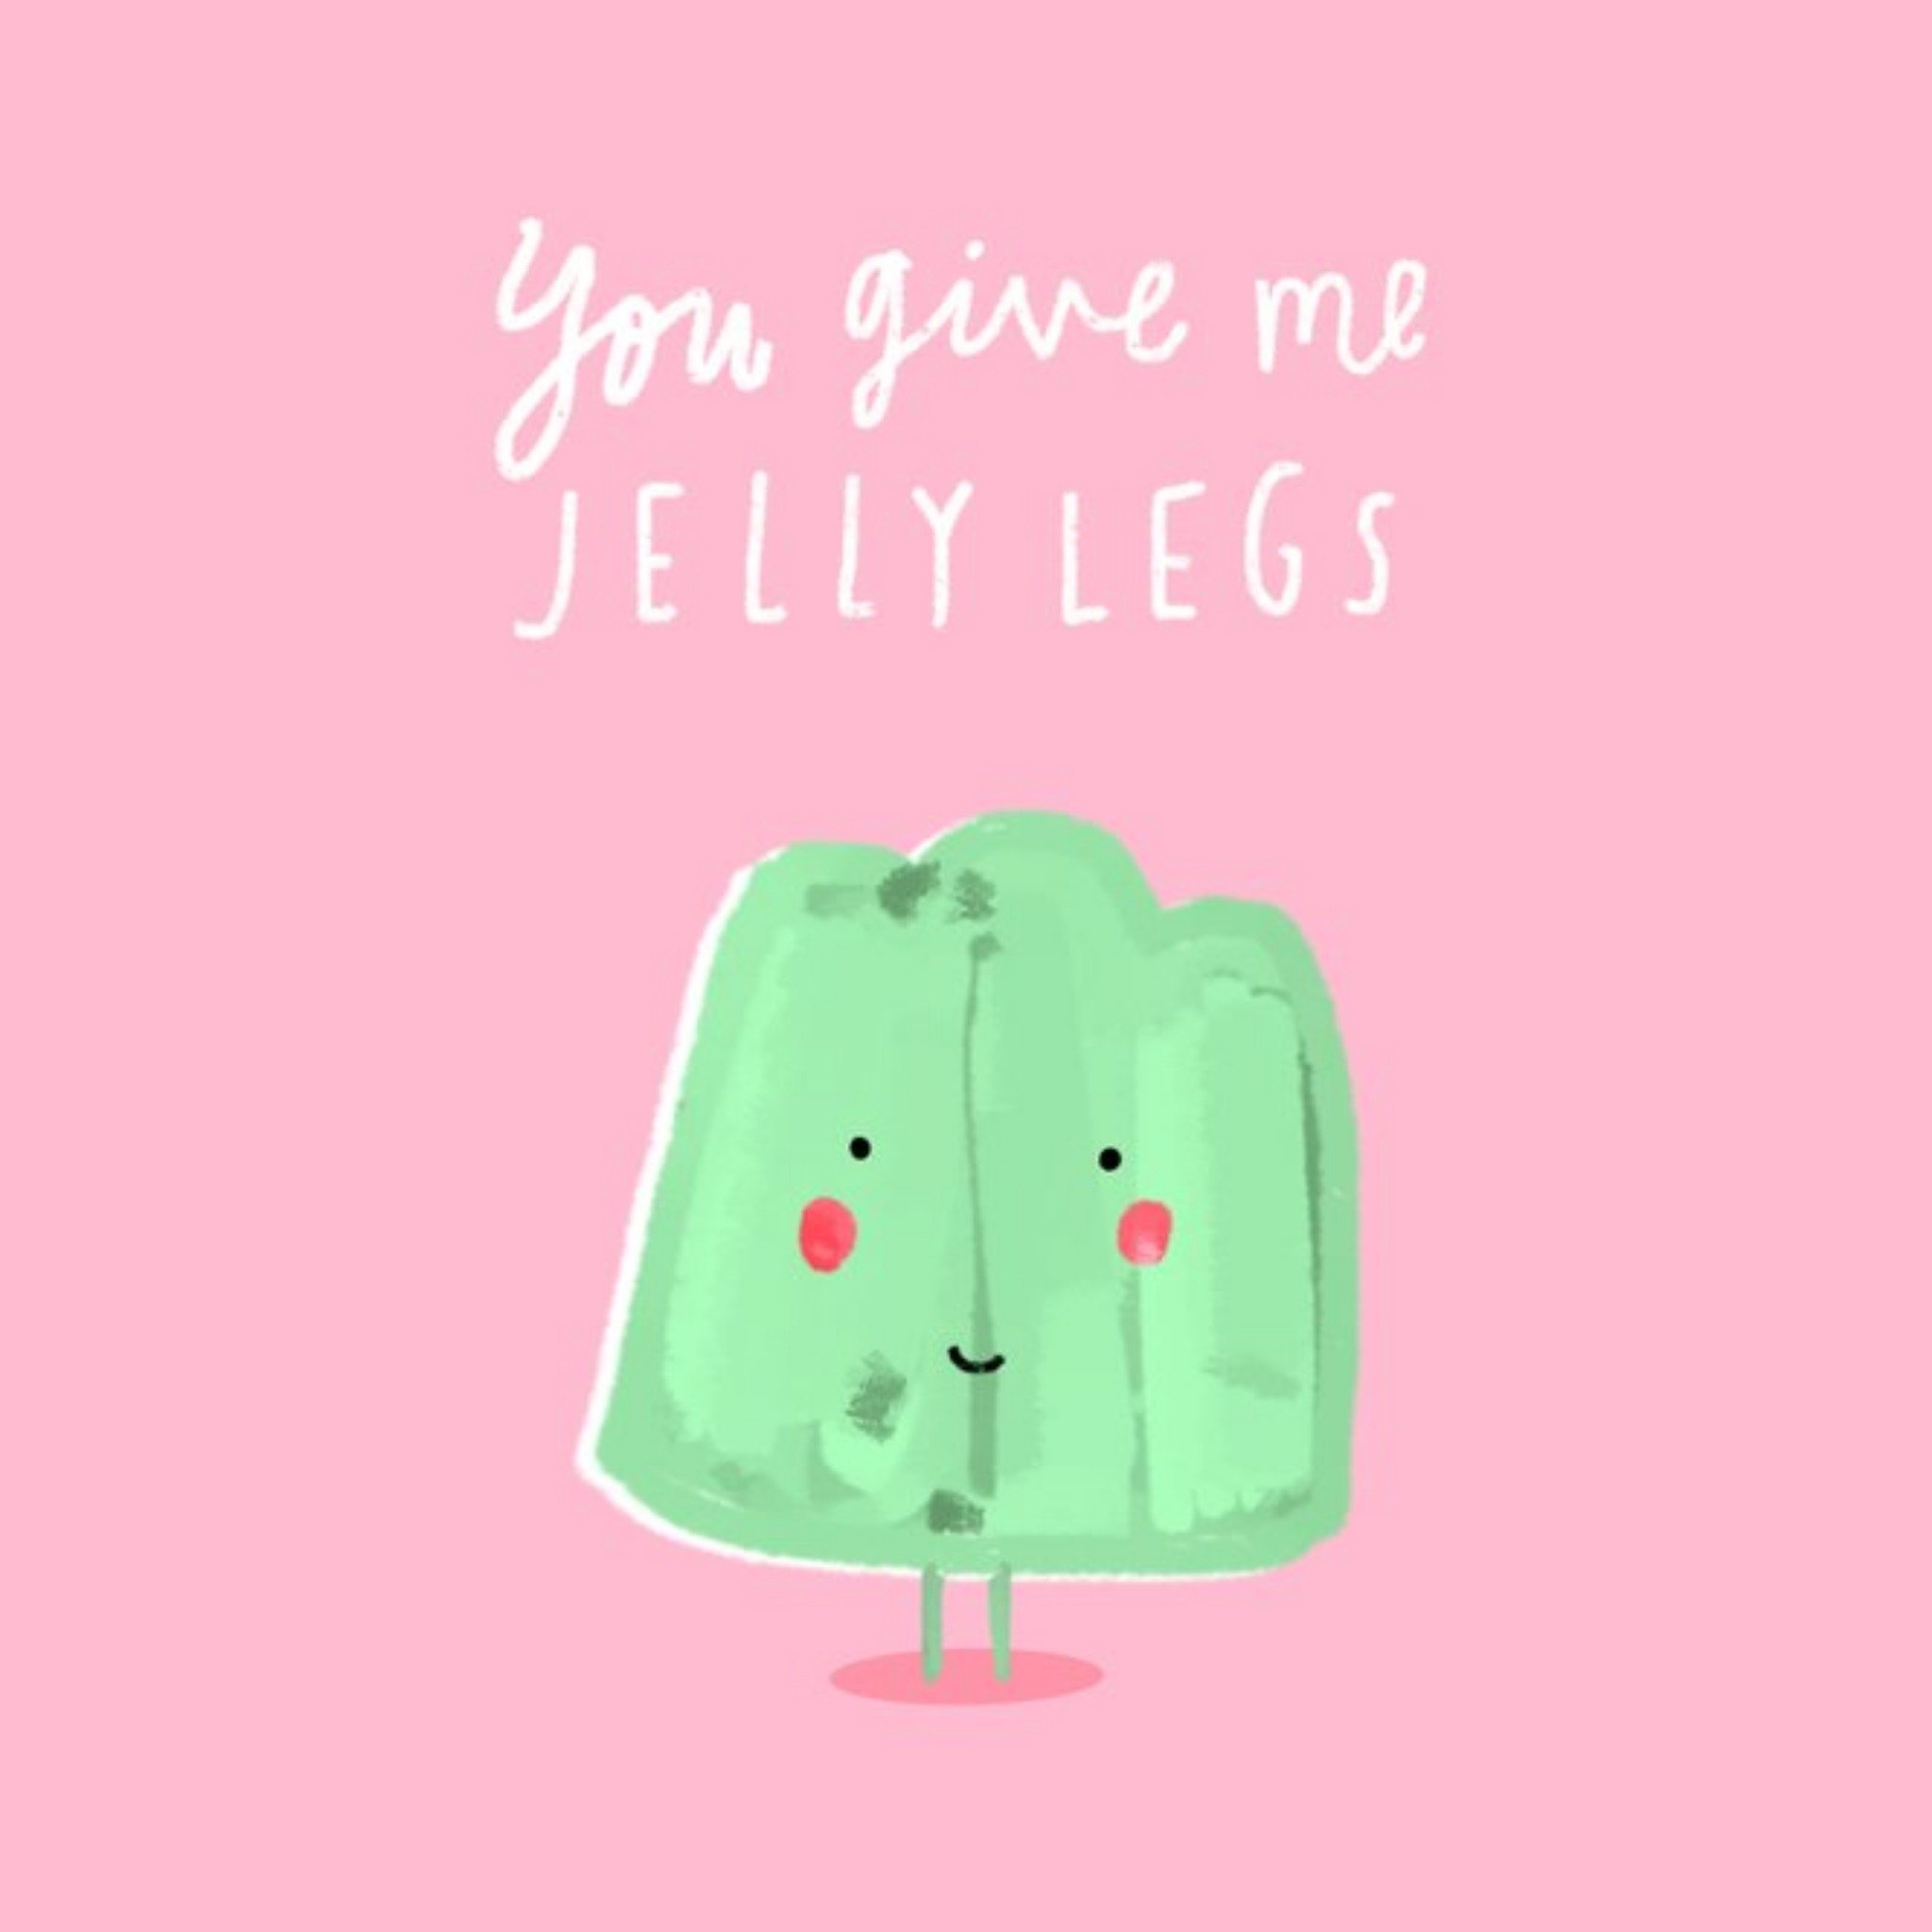 Moonpig You Give Me Jelly Legs Card, Square